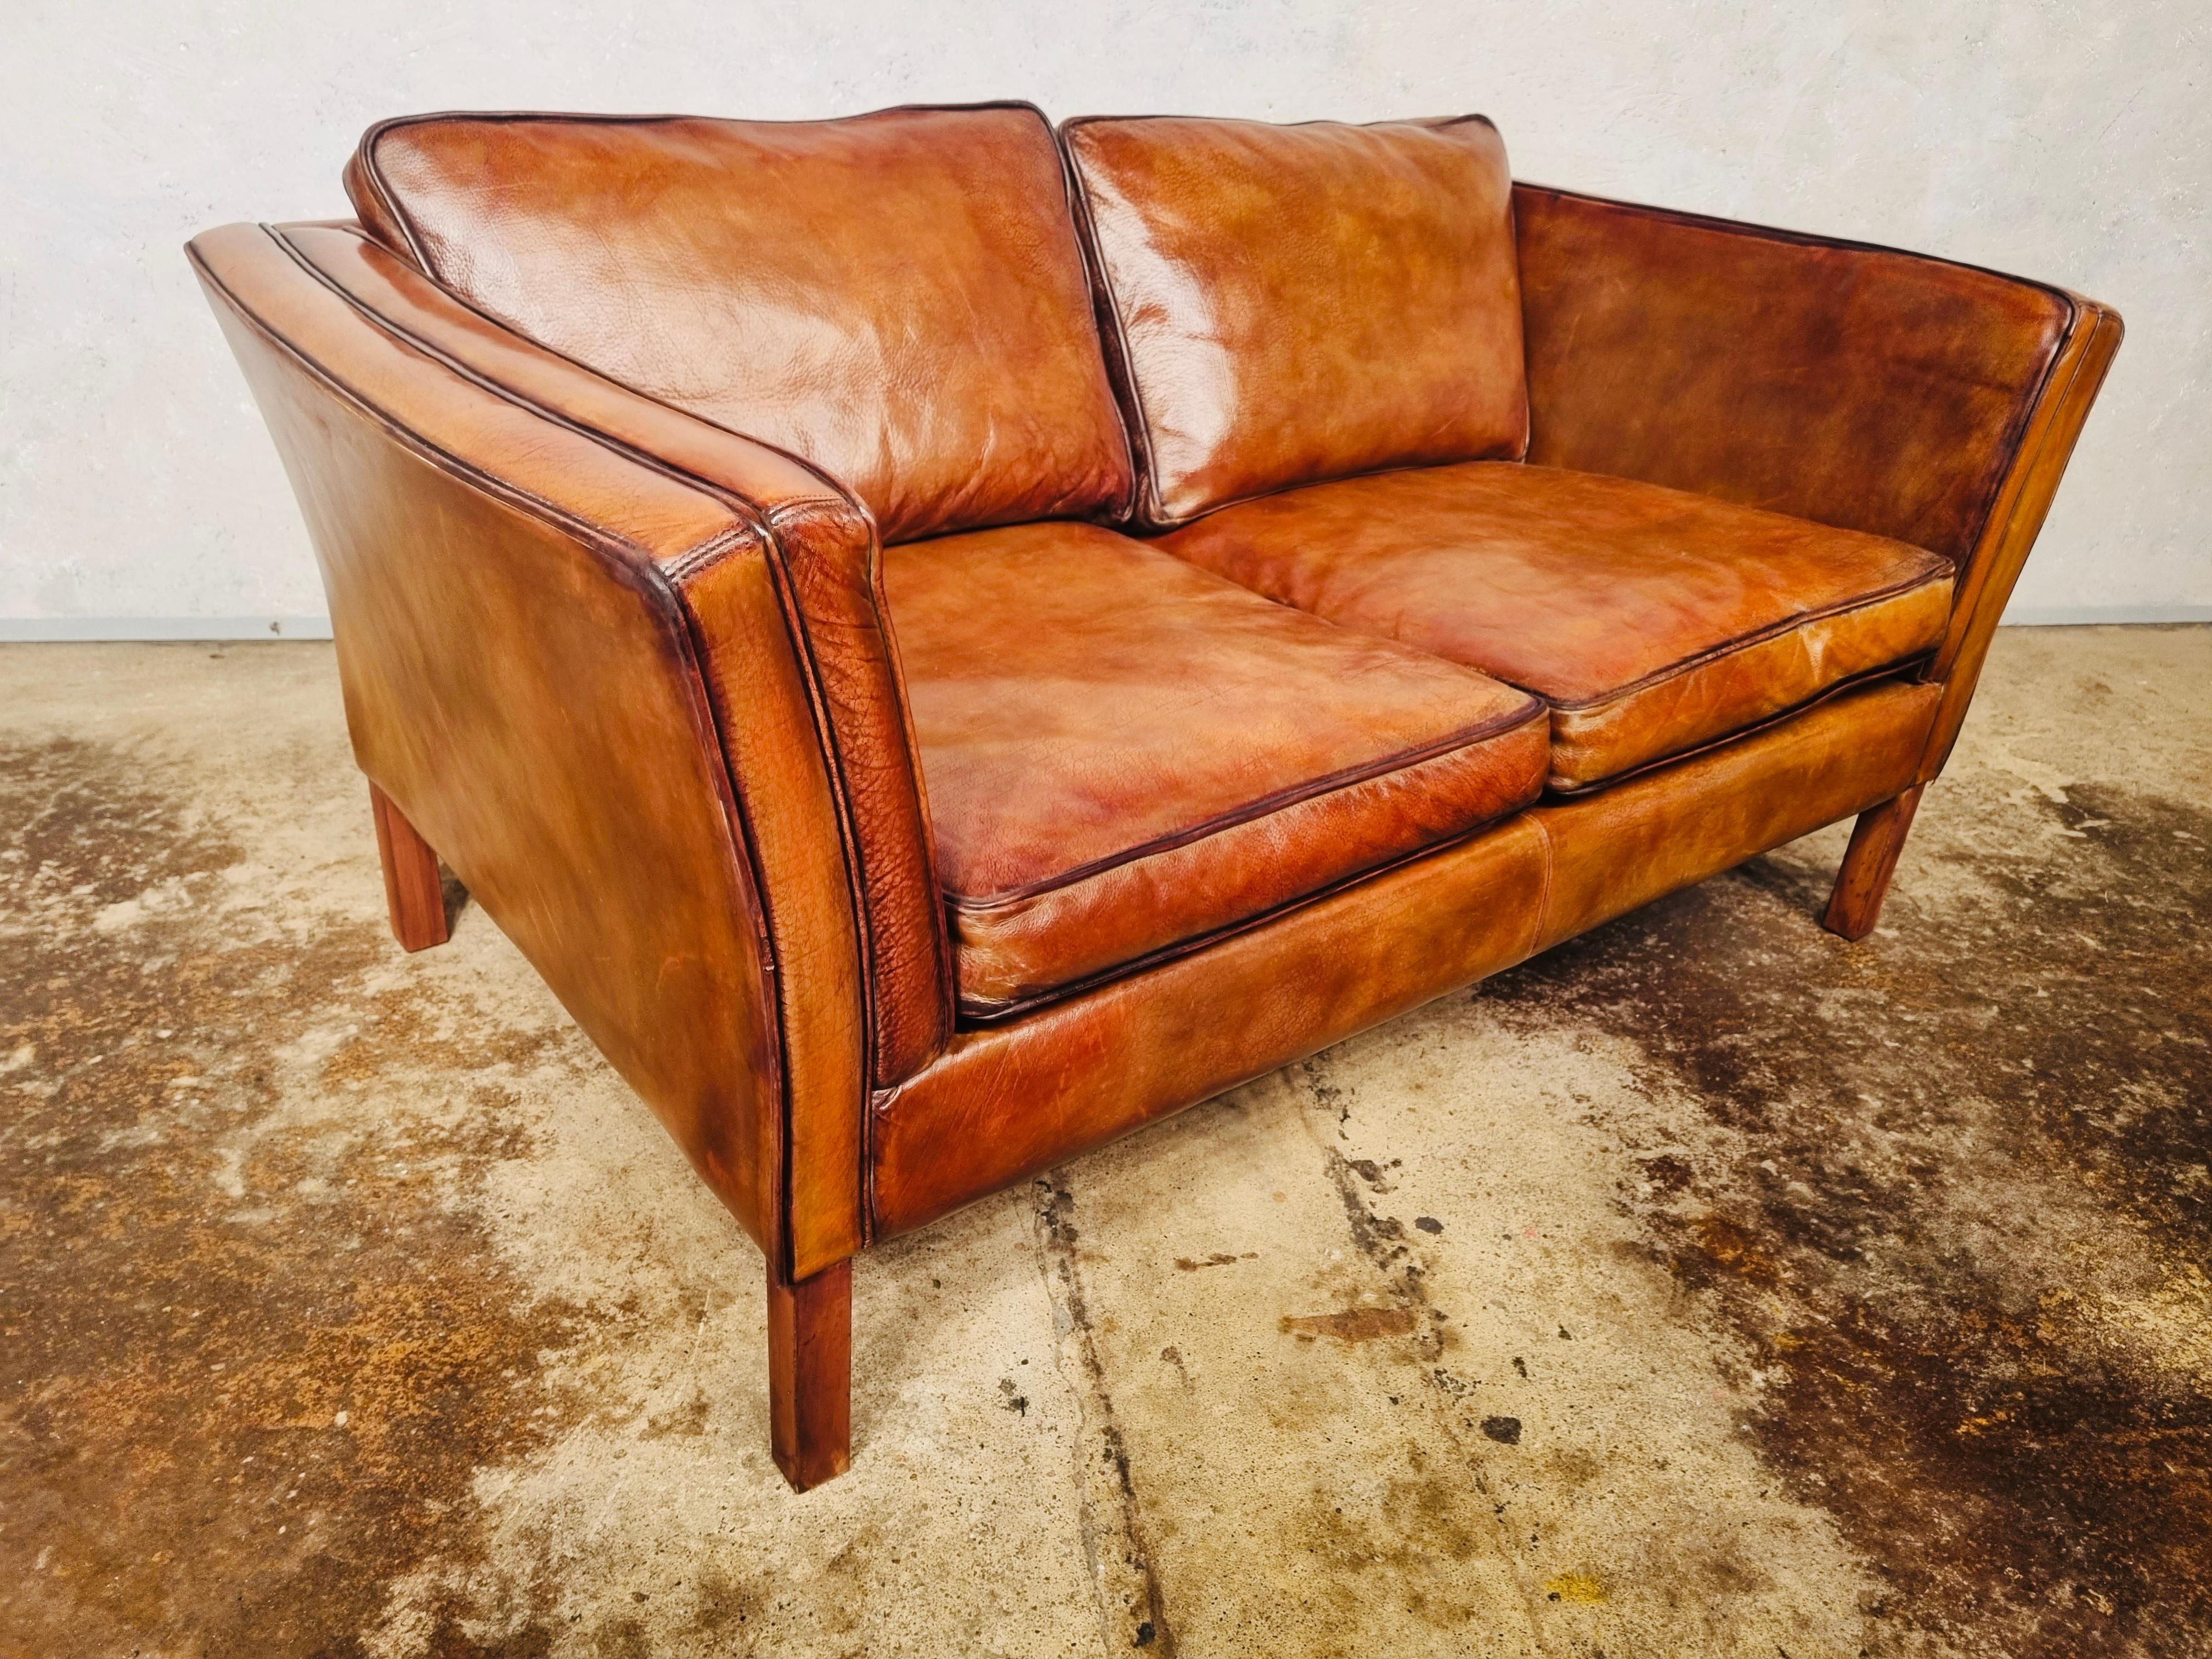 20th Century Neat Vintage Danish 70s Patinated Light Tan Two Seater Leather Sofa #679 For Sale